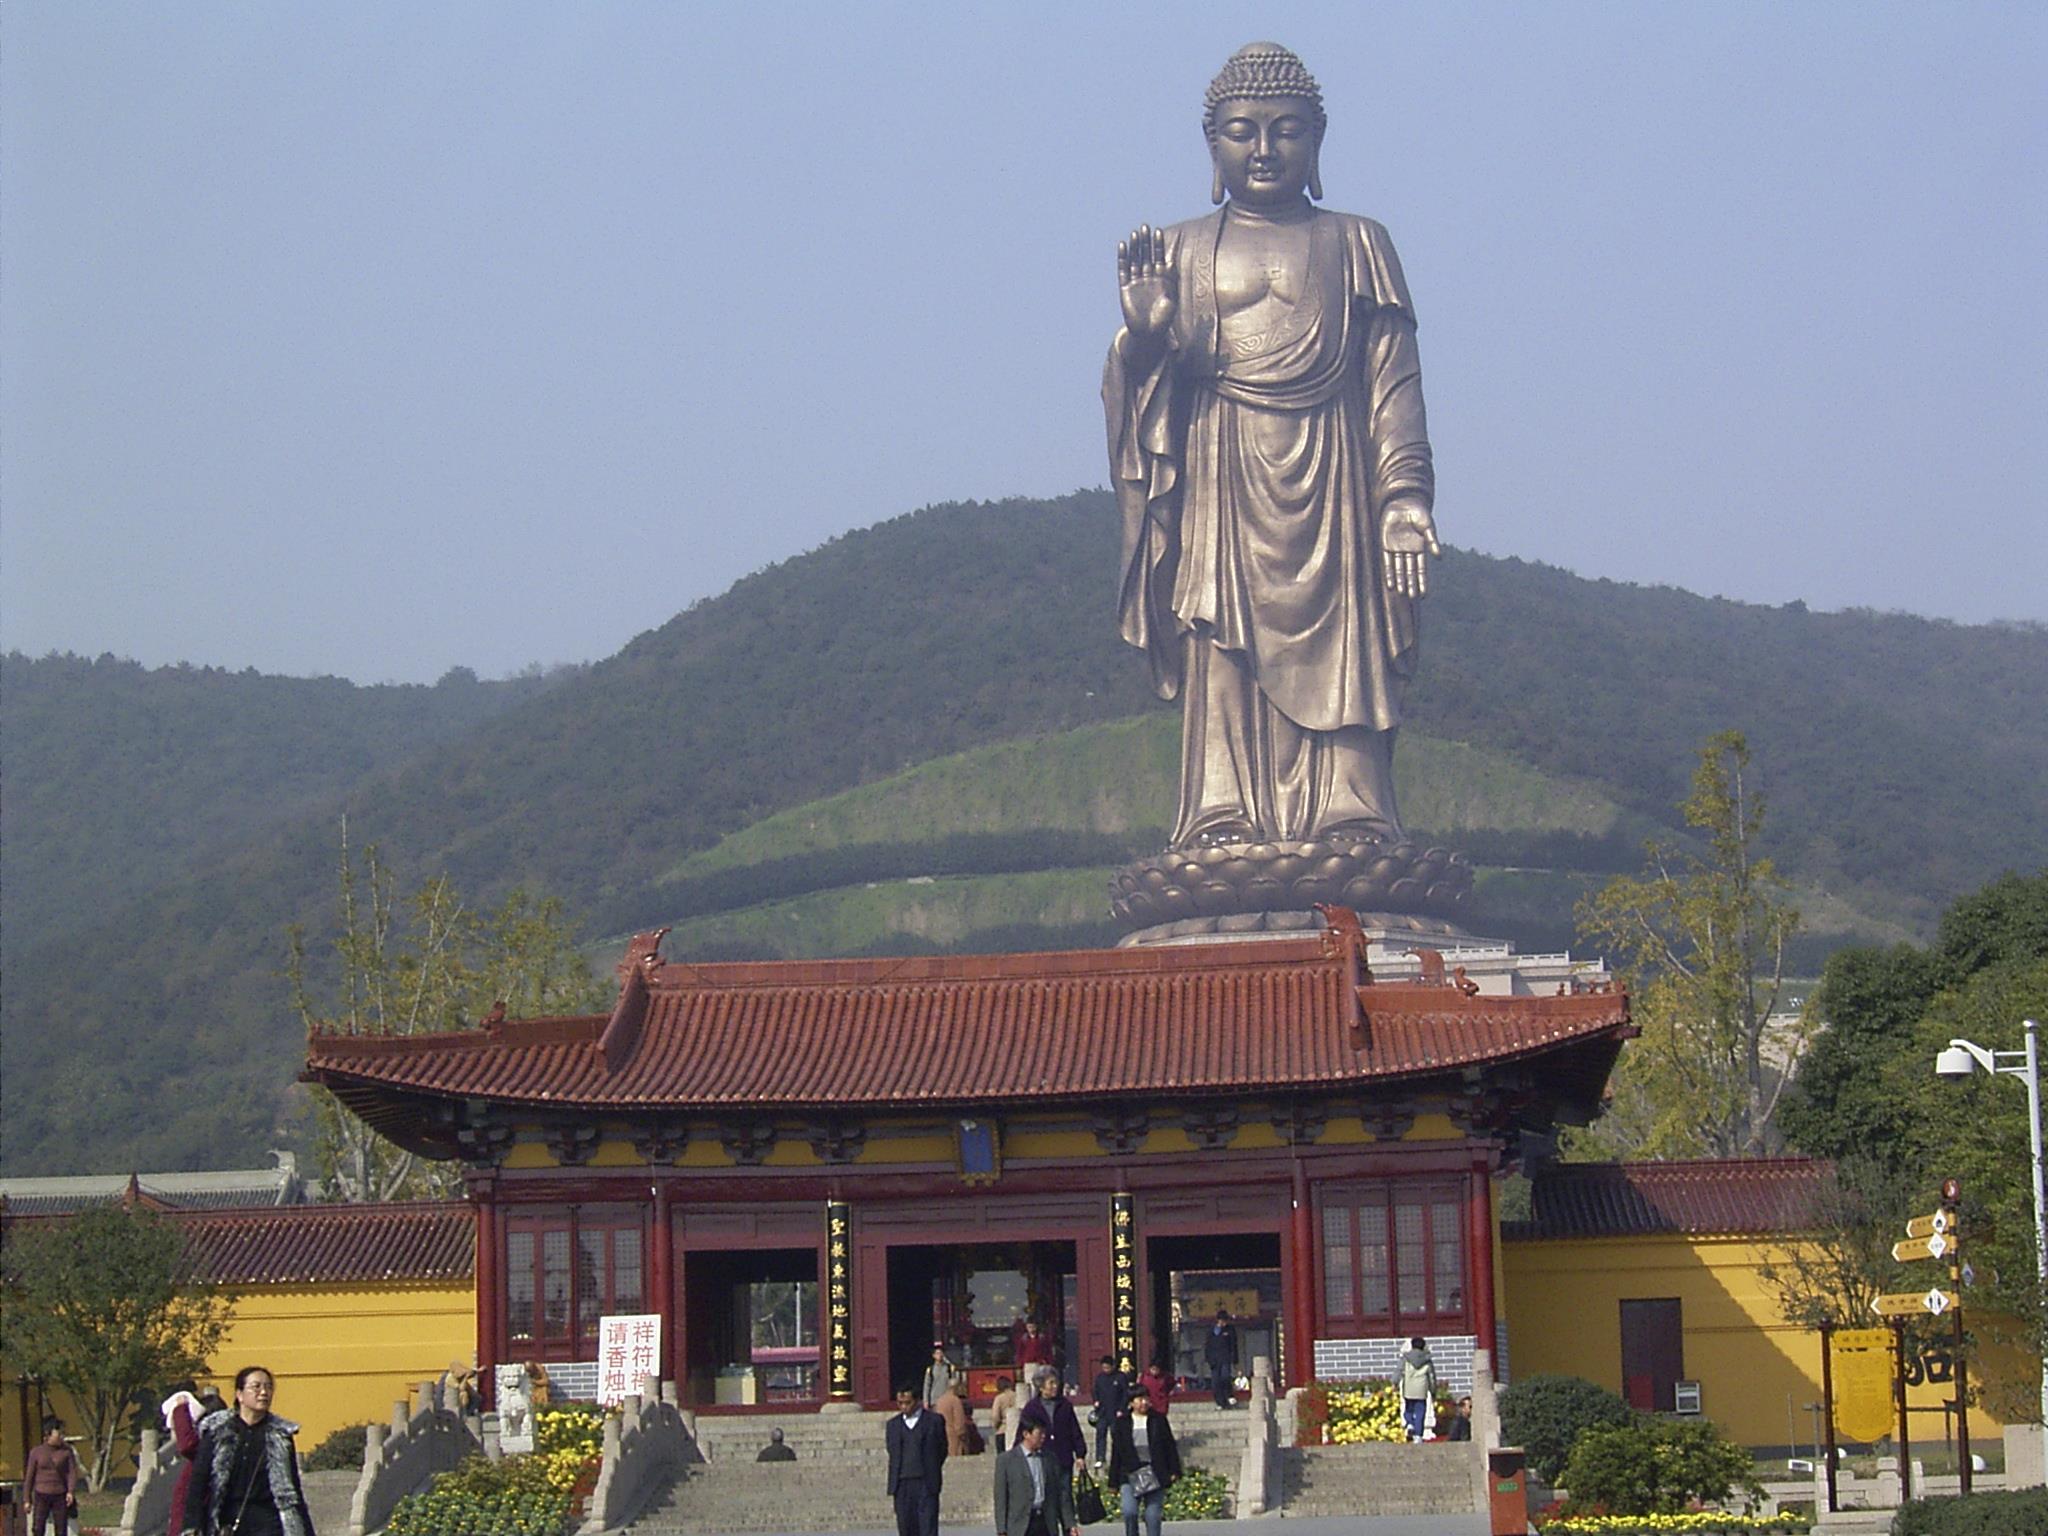 Tallest Statues in The World